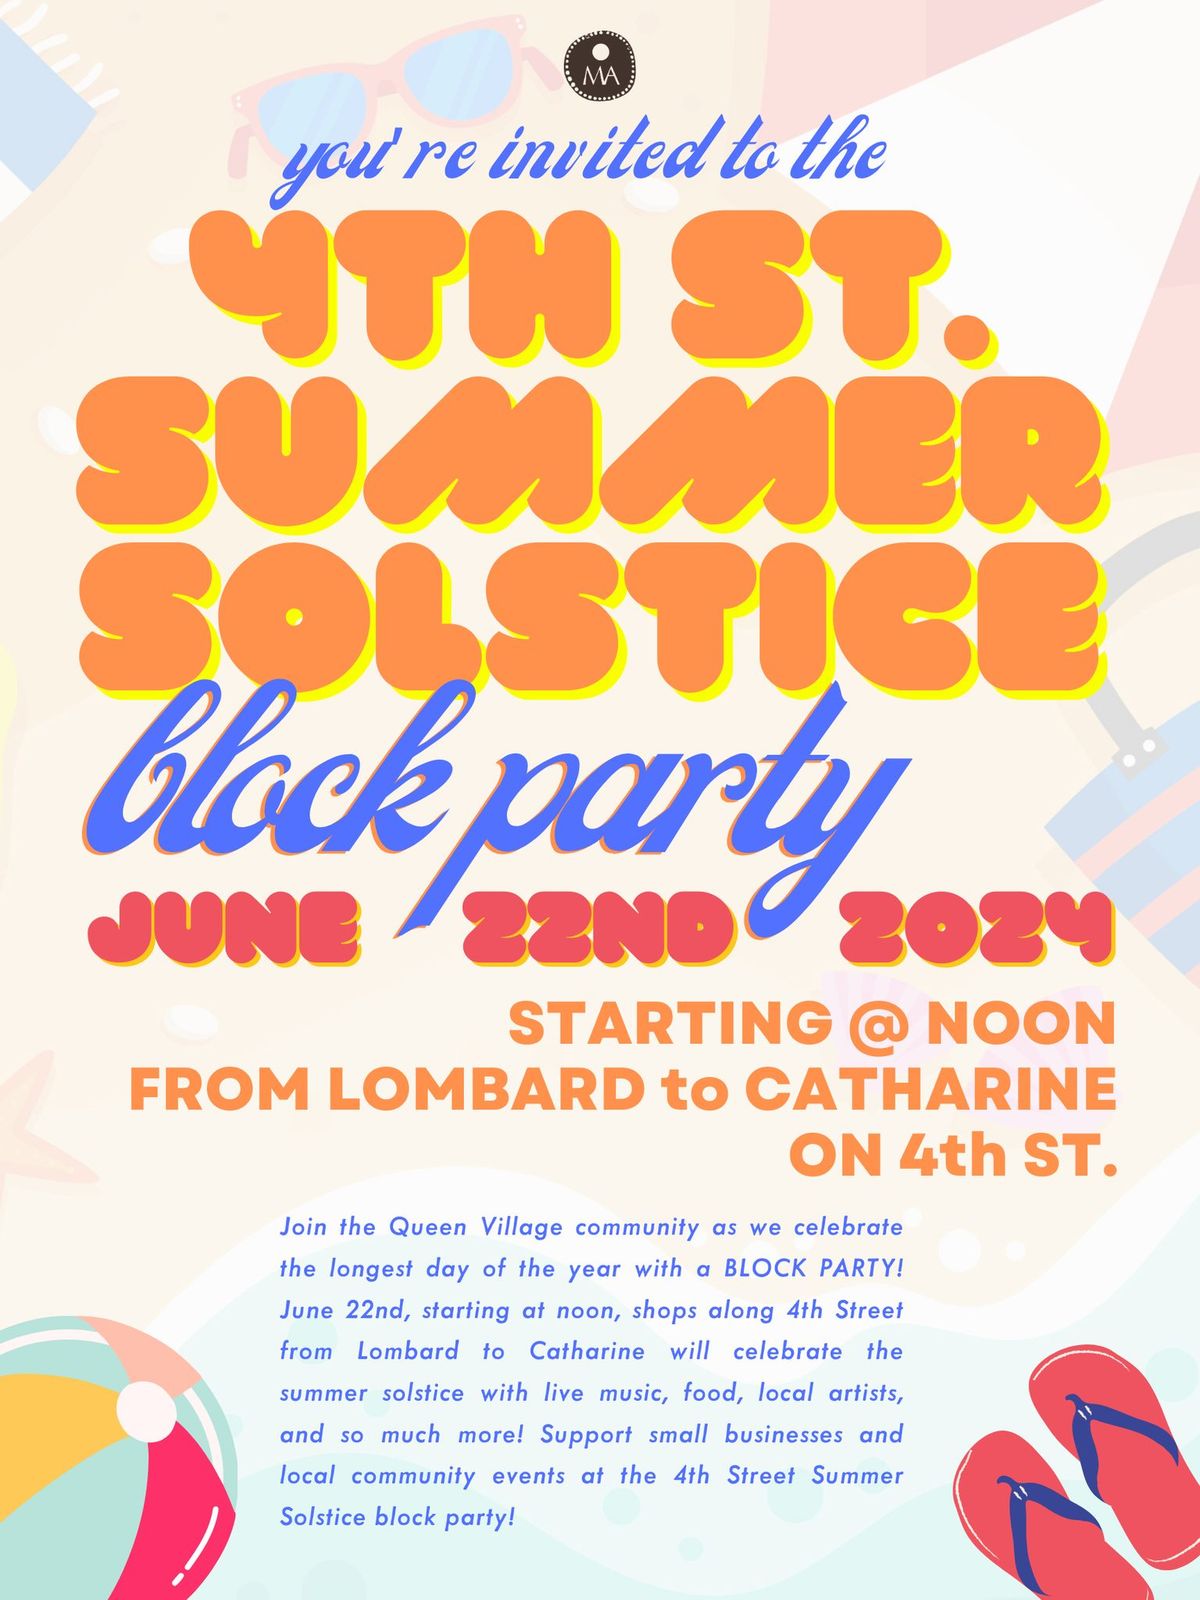 4th St. Summer Solstice Block Party